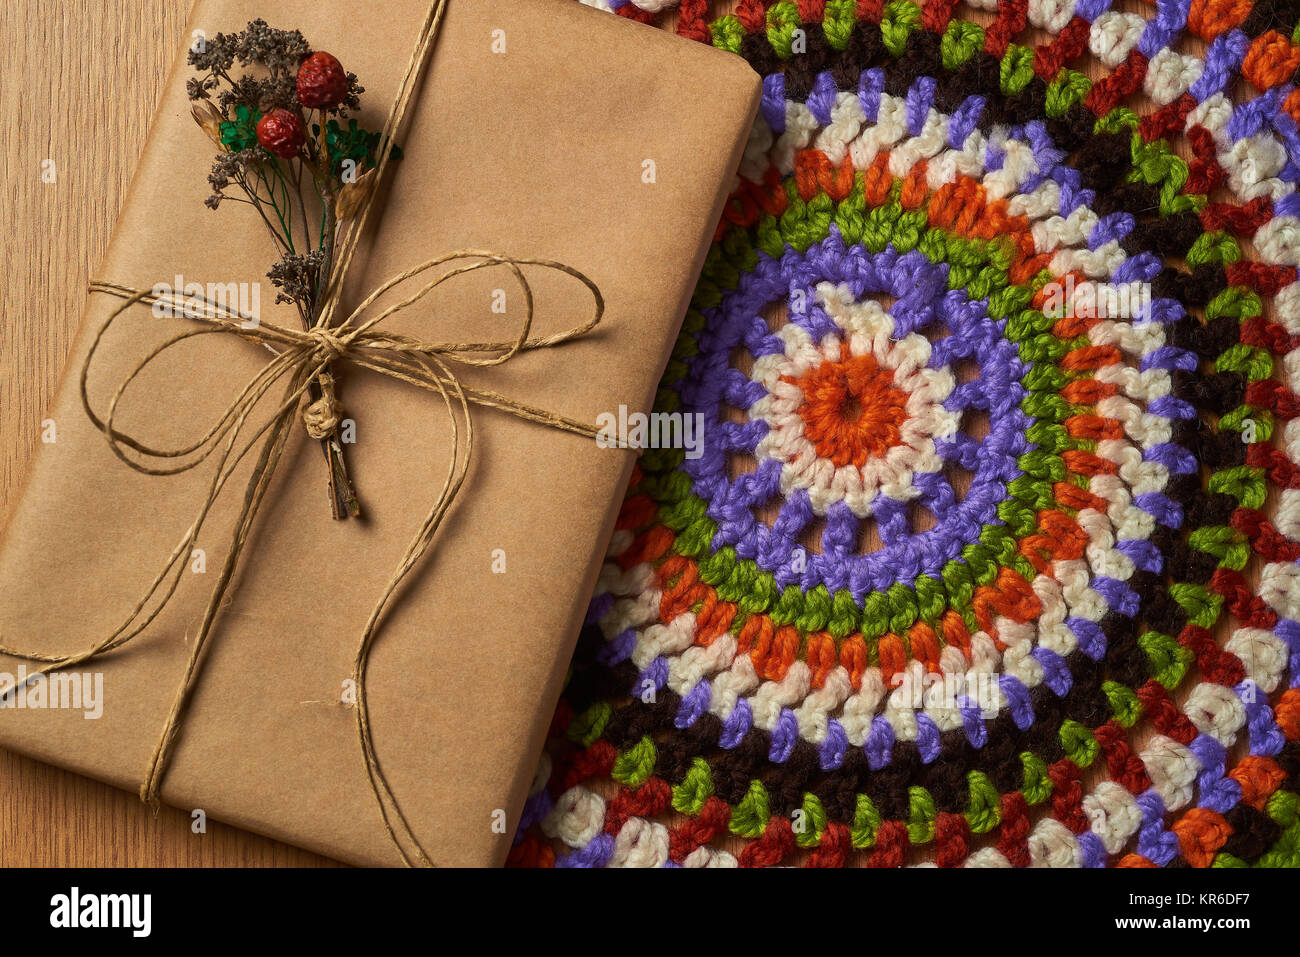 Wrapped book tied with brown paper thread with small dried bouquet of field plants is lying on the table on colorful knitted napkin. Stock Photo